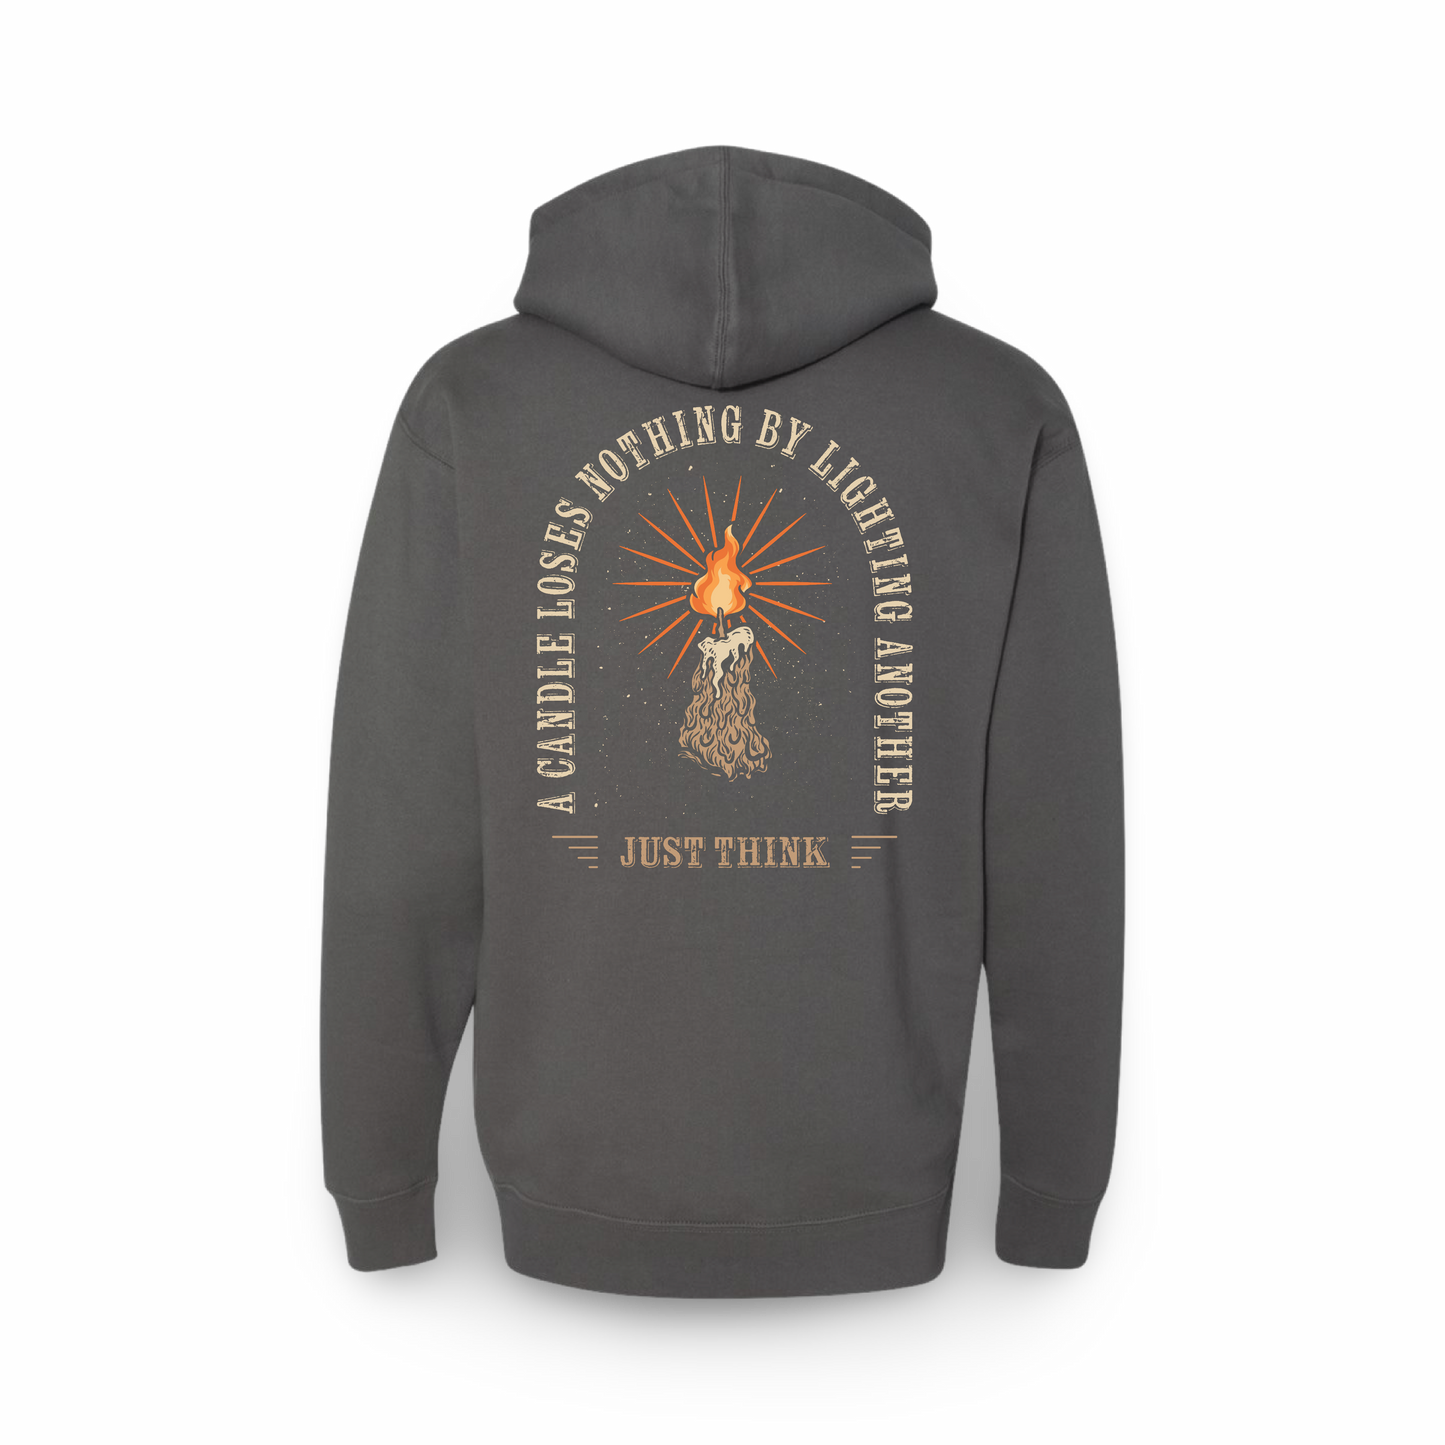 A Light Is All It Takes (Premium Hoodie)